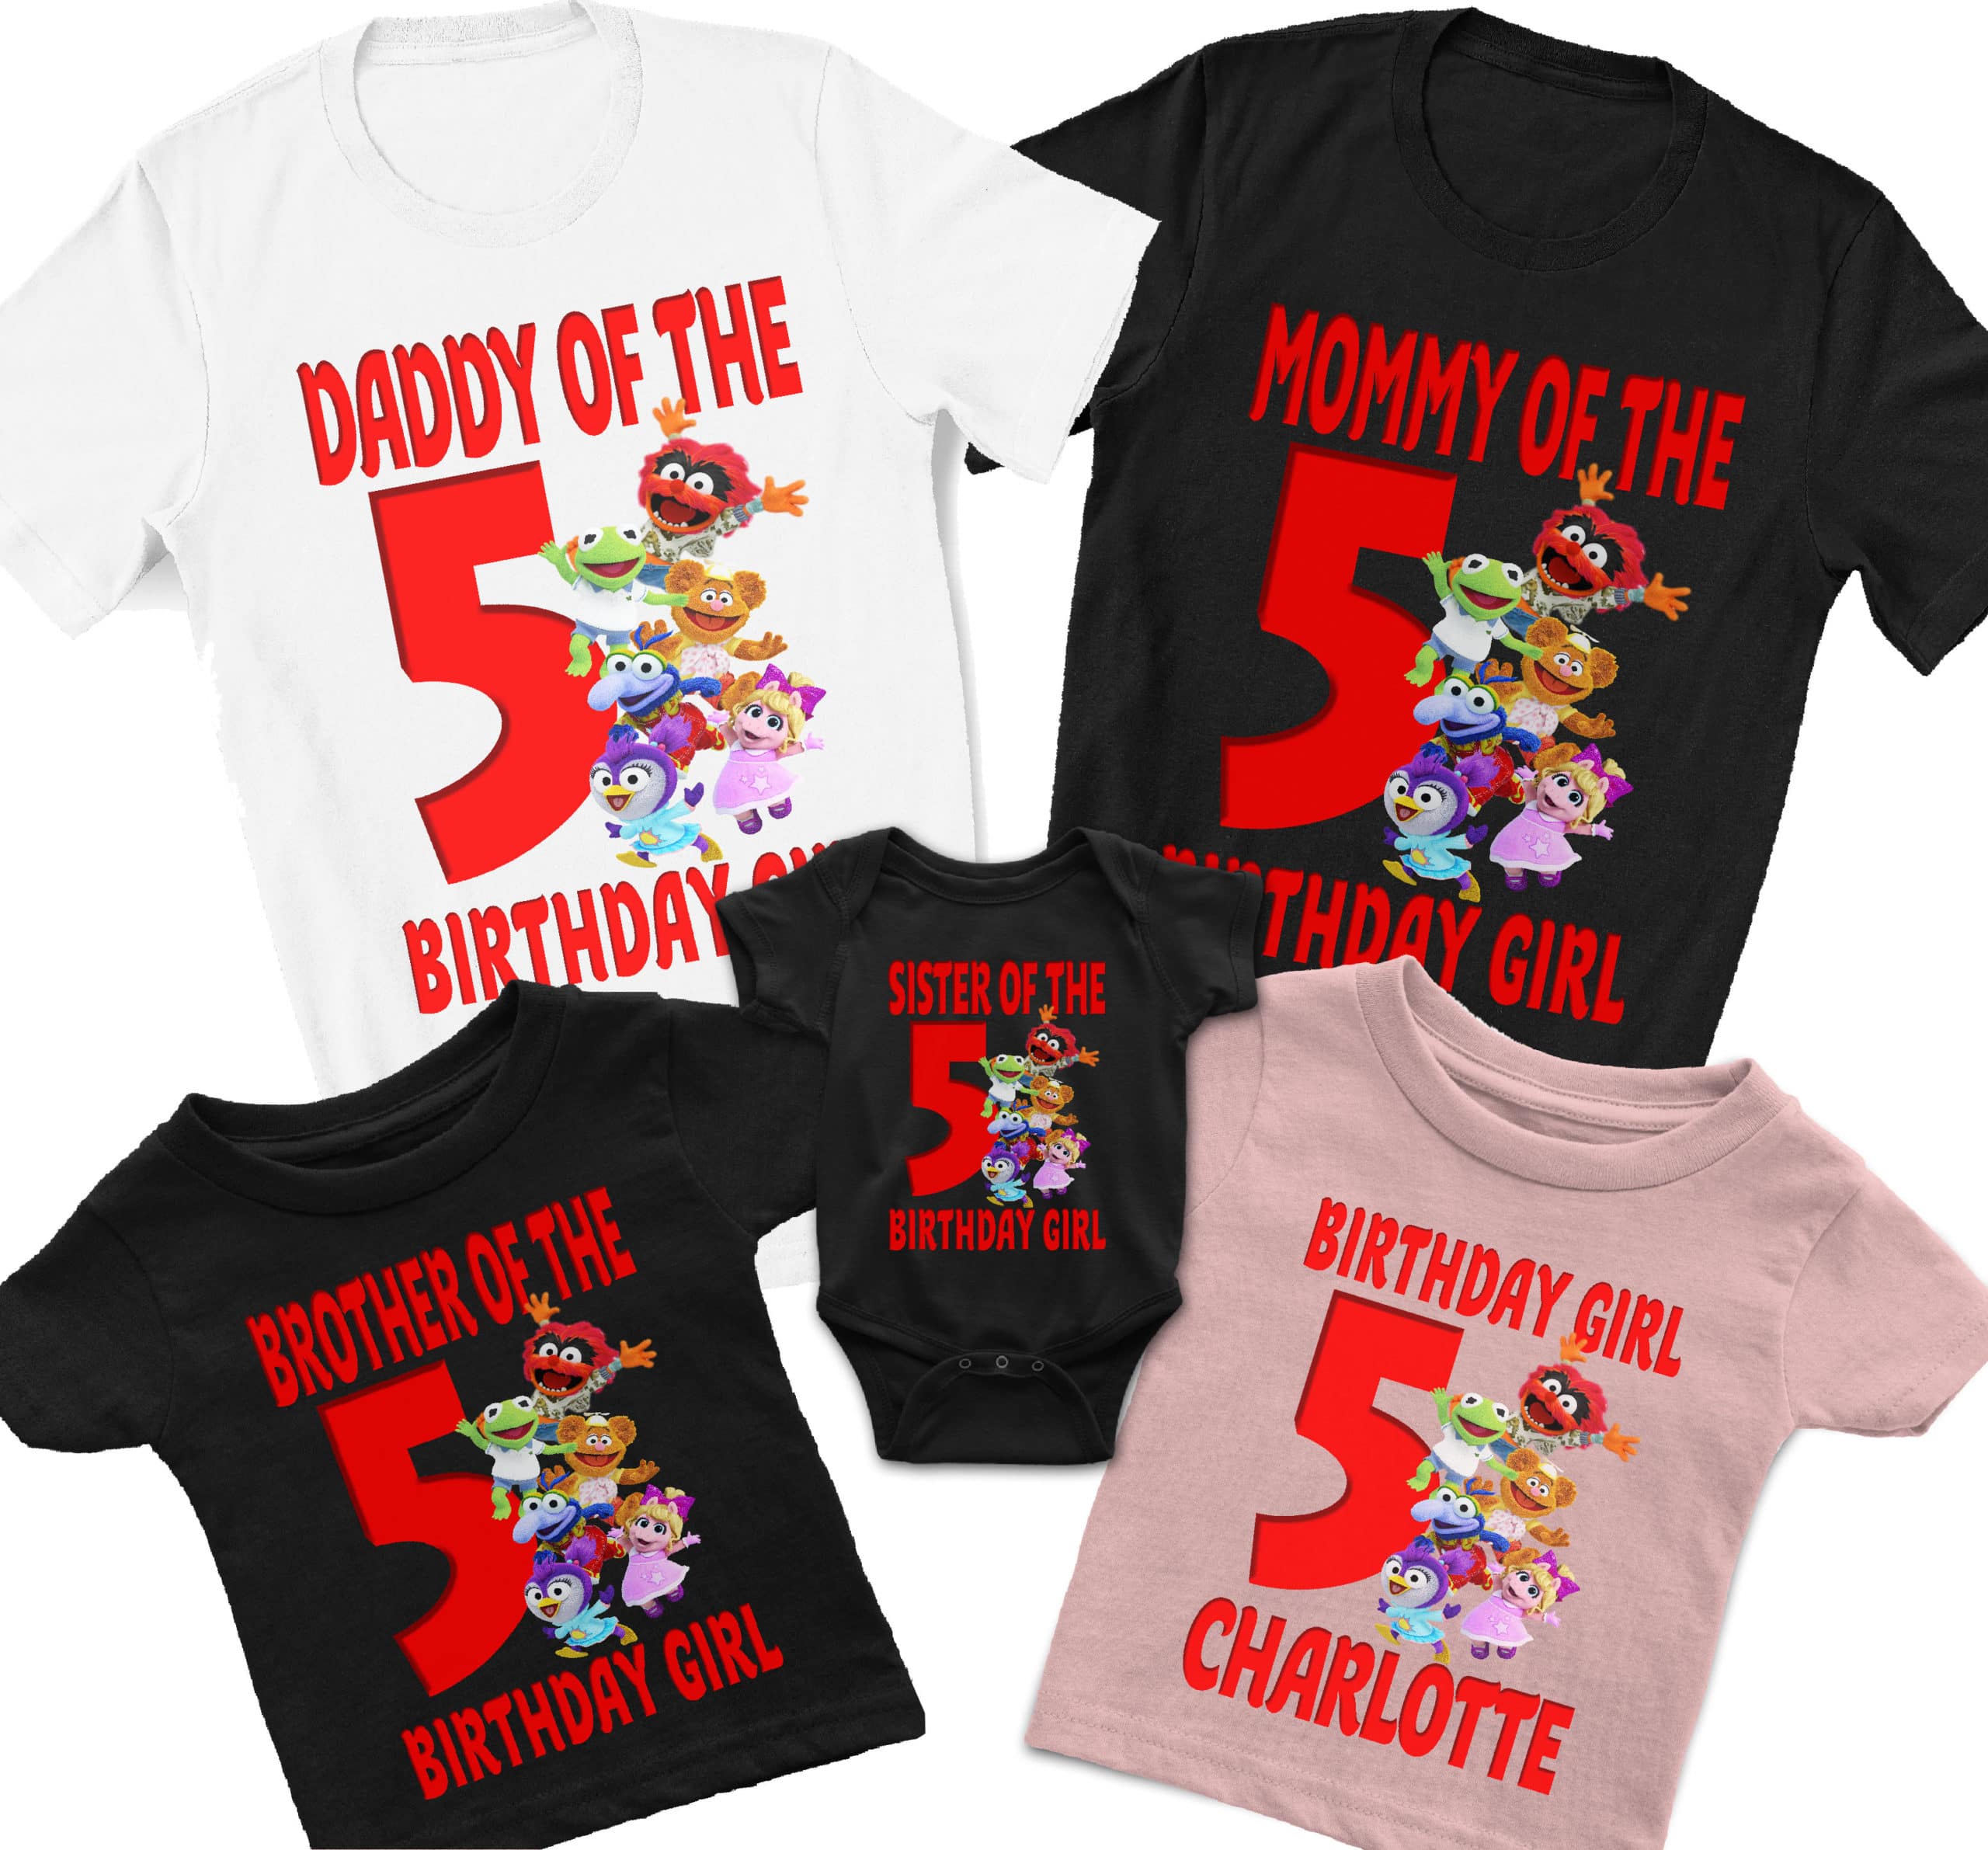 Muppet Babies Birthday Shirt Add Any Name and Age Custom Muppet Birthday Shirt Girl Muppet Shirt 